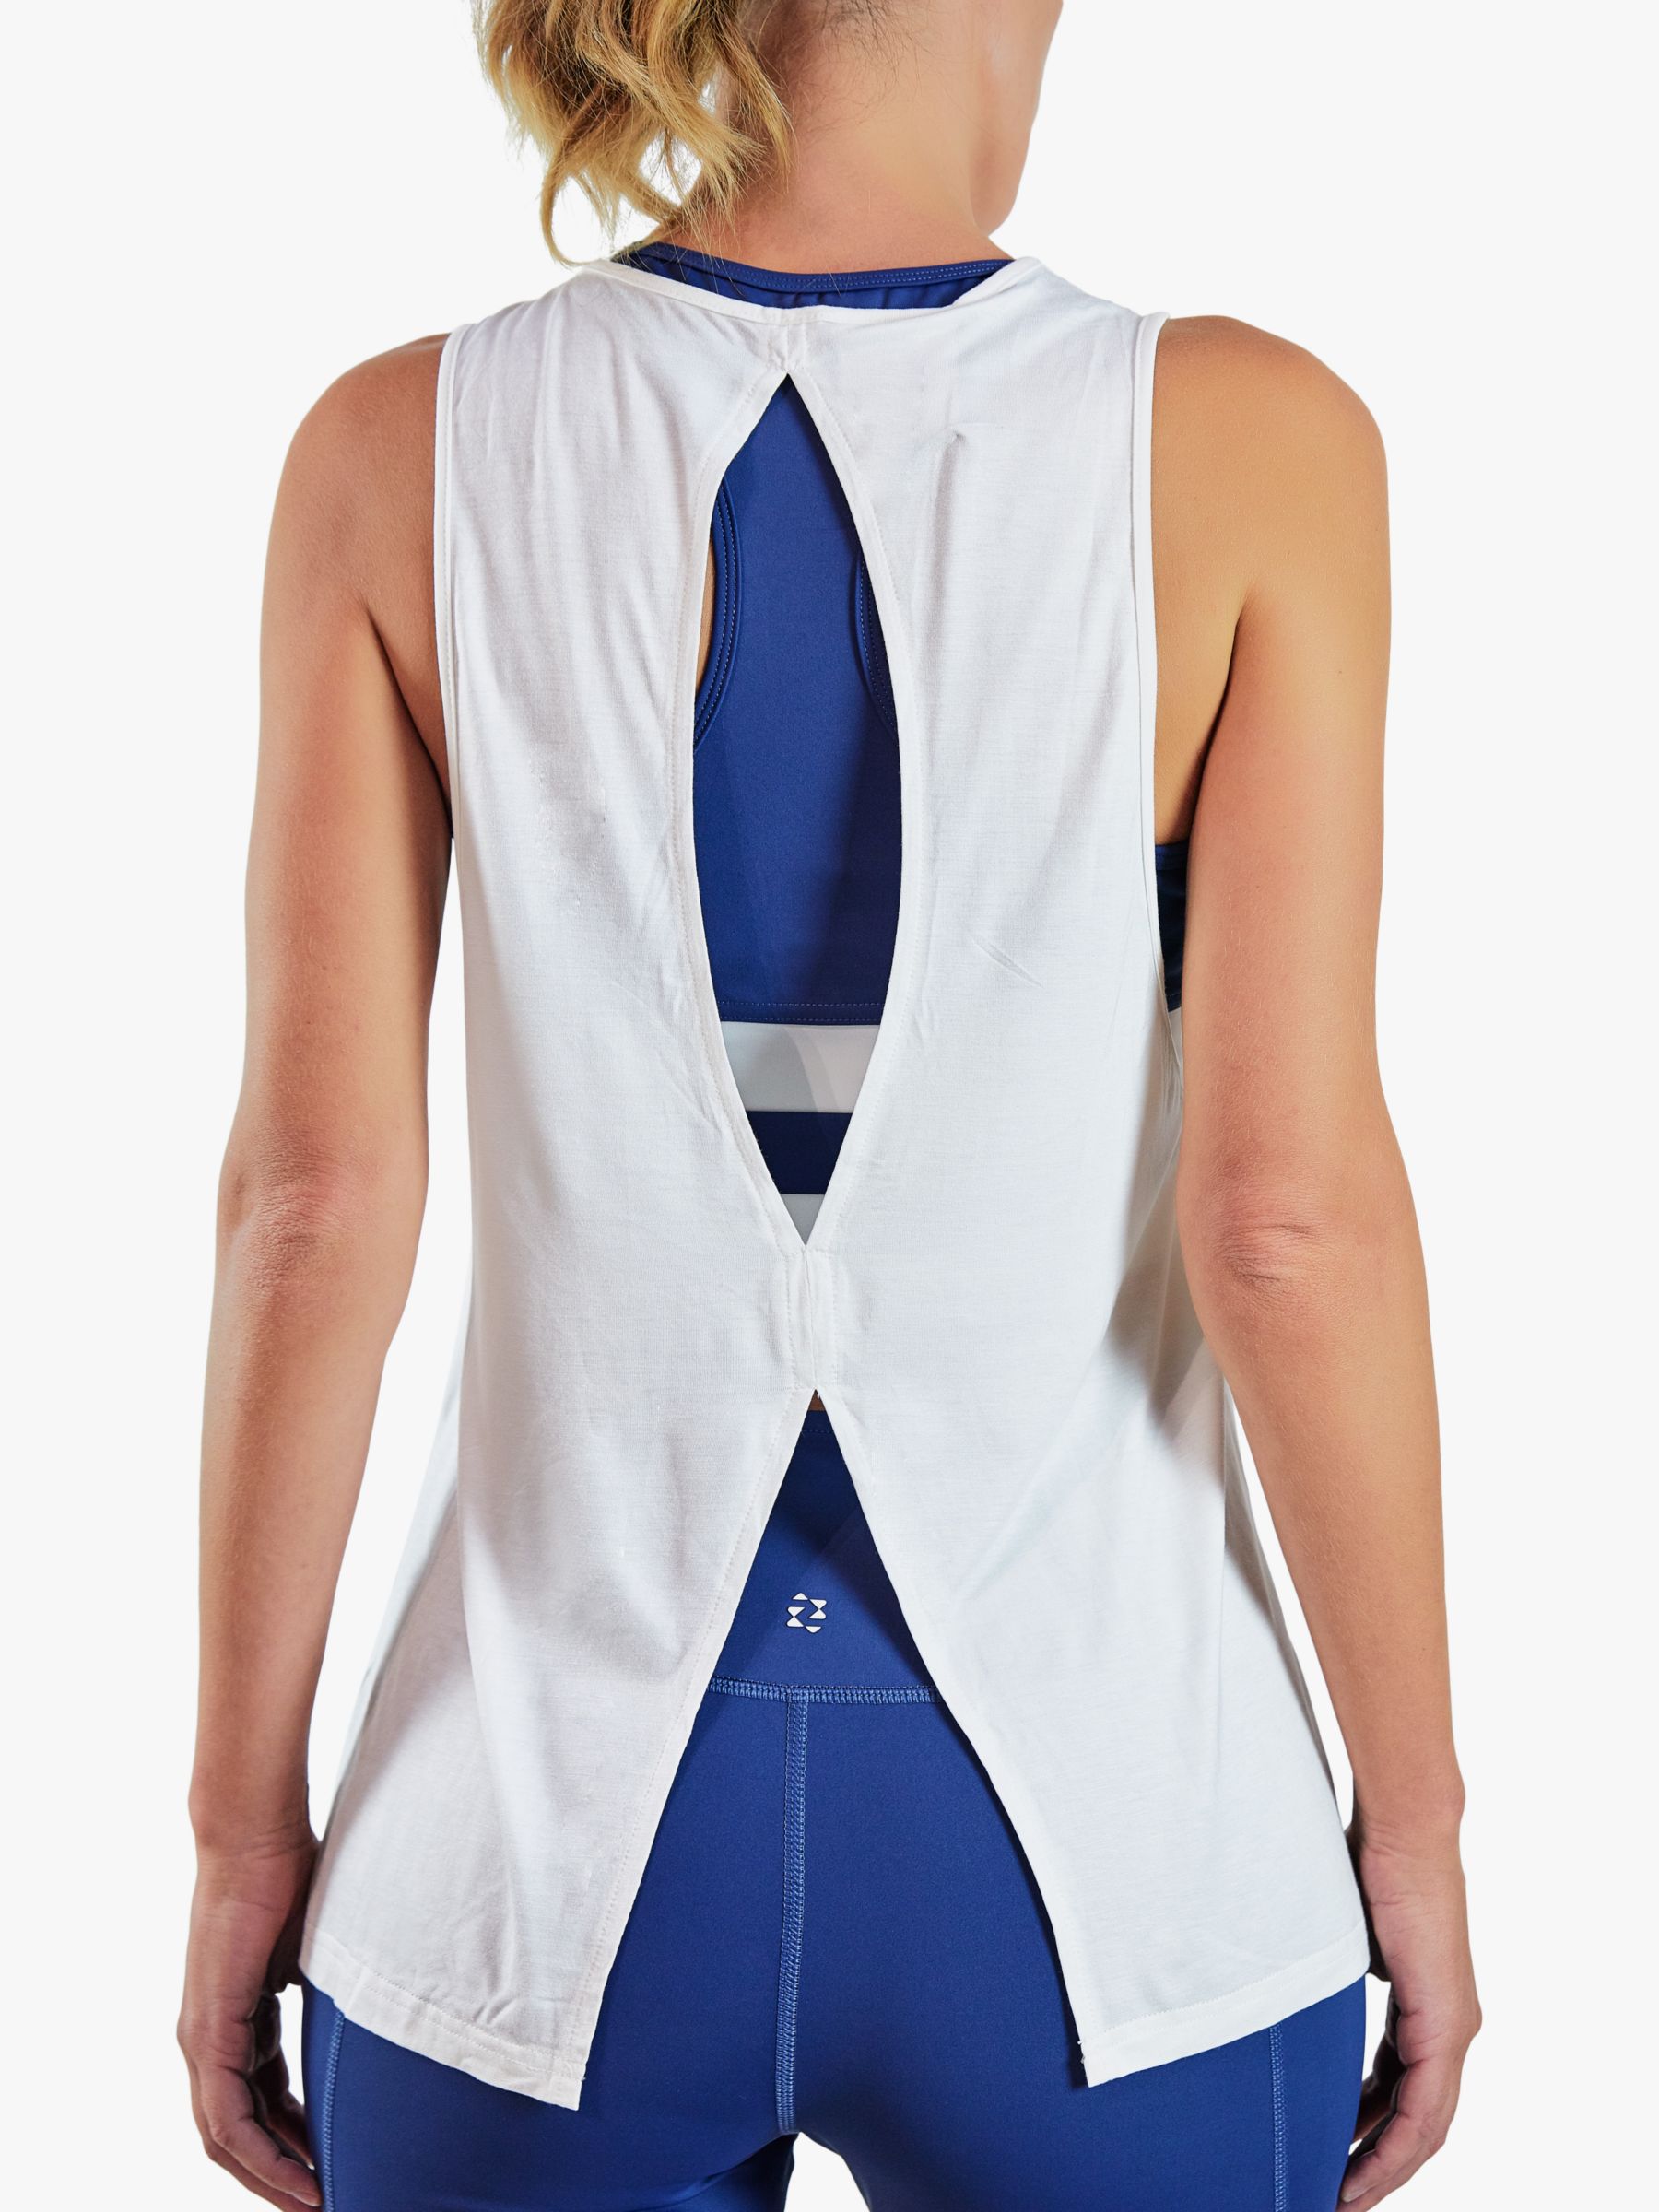 Buy Zozimus Activate Sports Tank Top Online at johnlewis.com